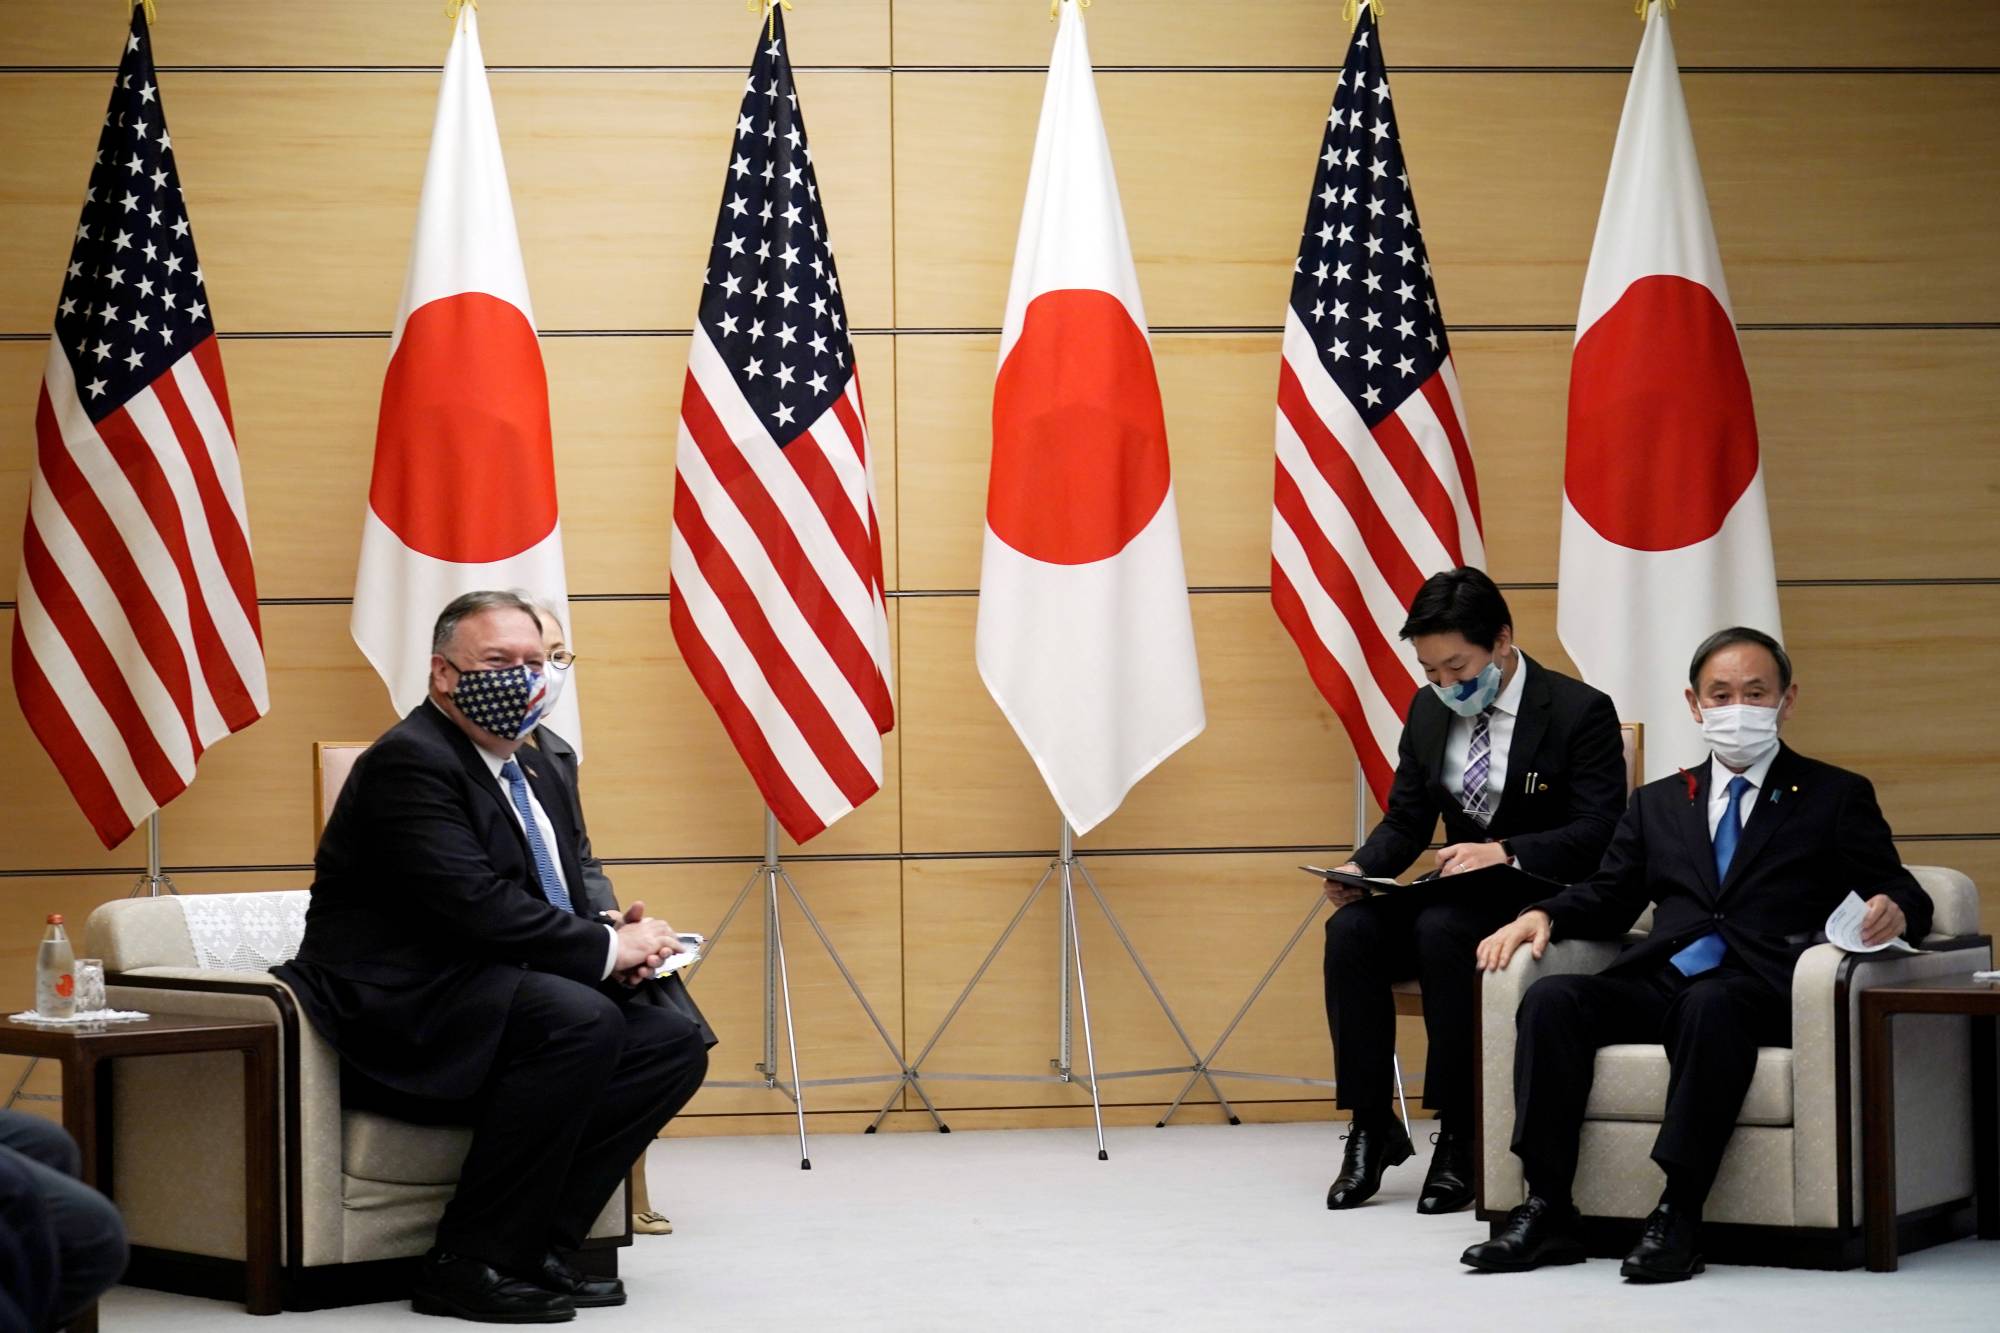 It is imperative for Yoshihide Suga’s administration to undertake a prudent reality check and possible rebalancing of its national security agenda now rather than simply to assert that the Japanese government will continue the policies of his predecessor, Shinzo Abe. | POOL / VIA REUTERS